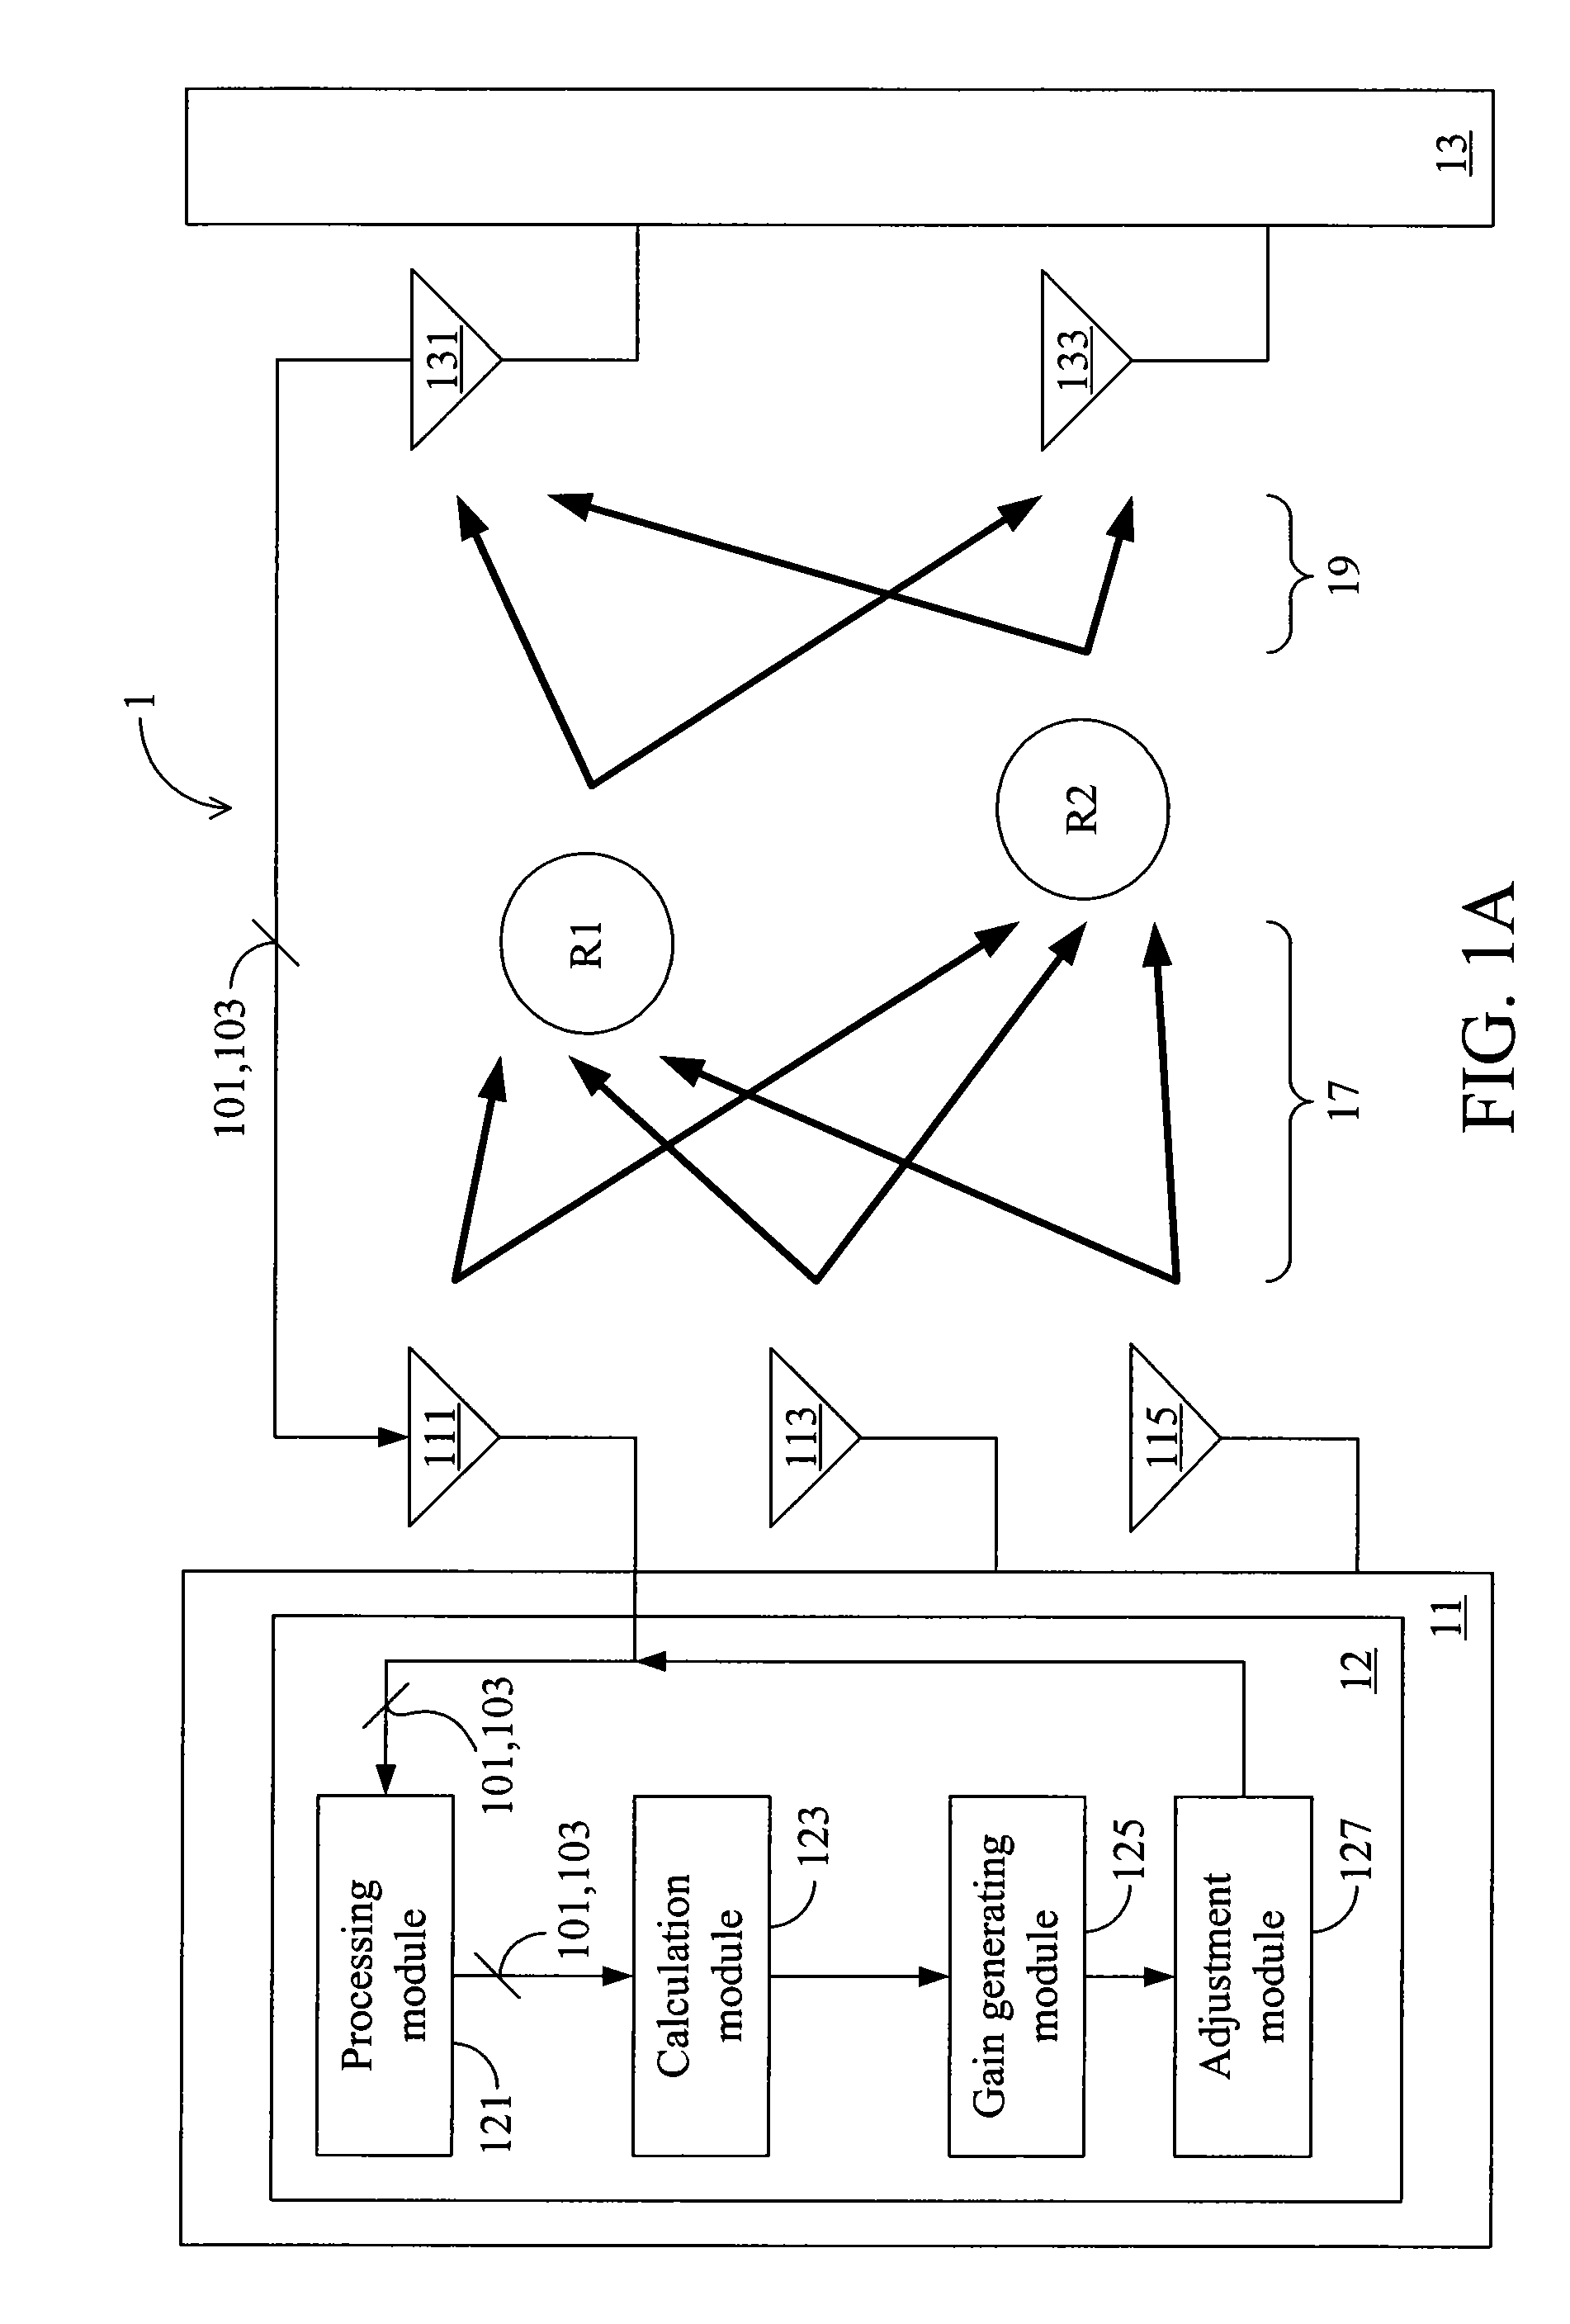 Gain adjustment apparatus, method, and tangible machine-readable medium thereof for a multiple input multiple output wireless communication system